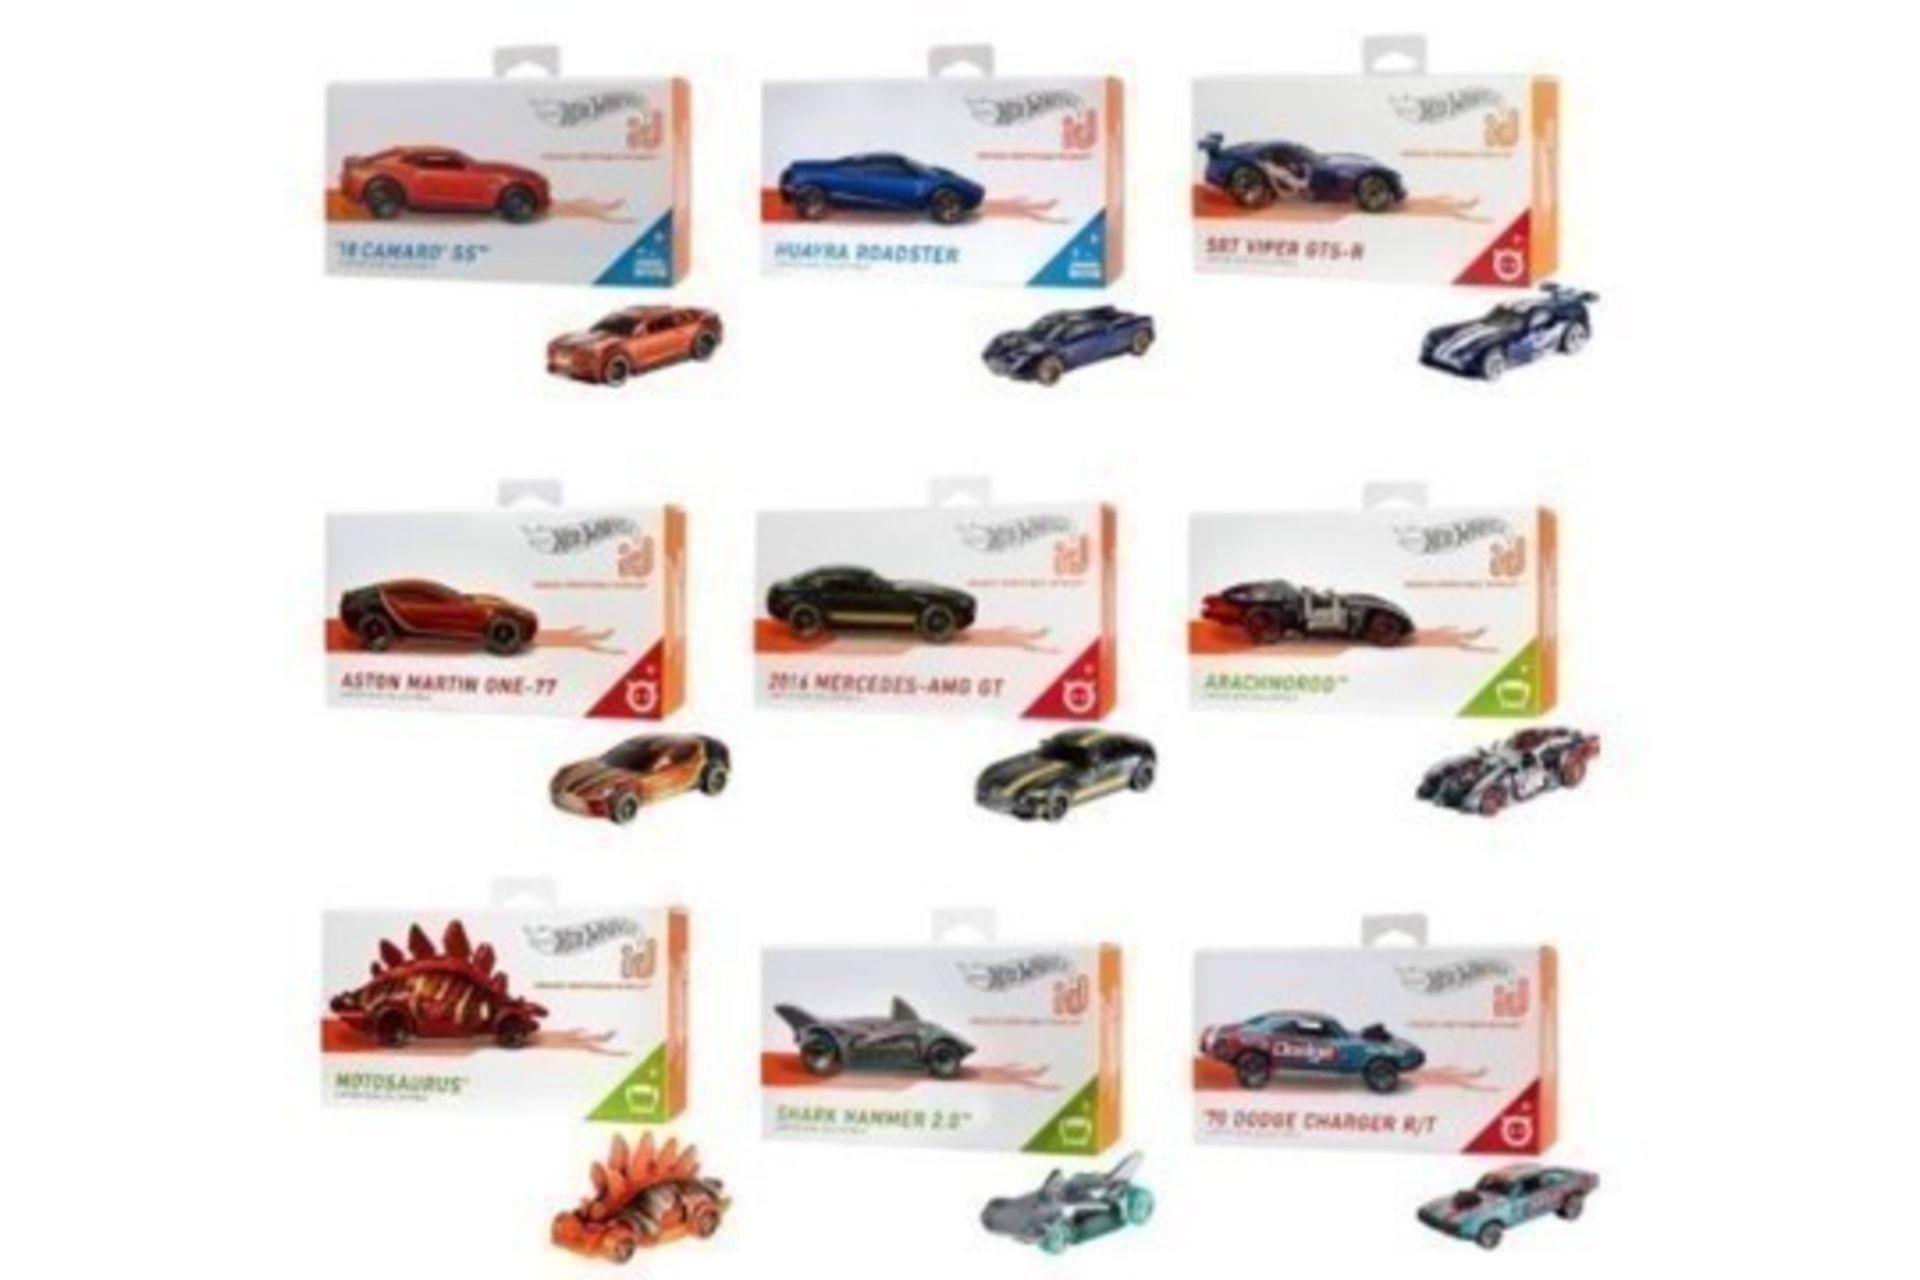 Hot Wheels Uniquely Identifiable Track Vehicles